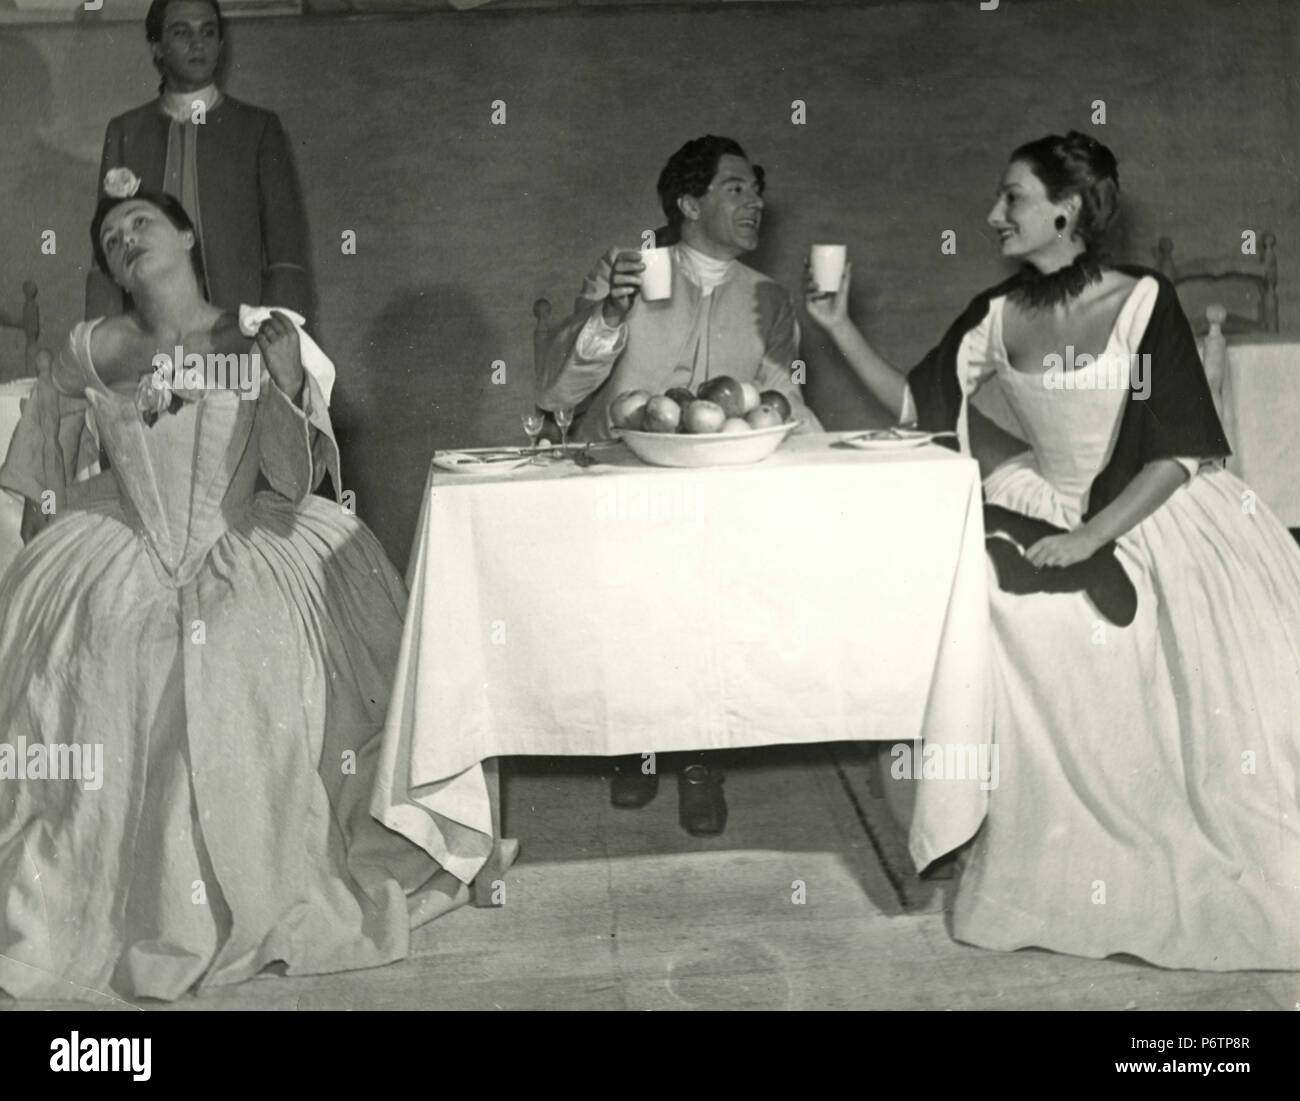 Unidentified theatre play, Italy 1970s Stock Photo